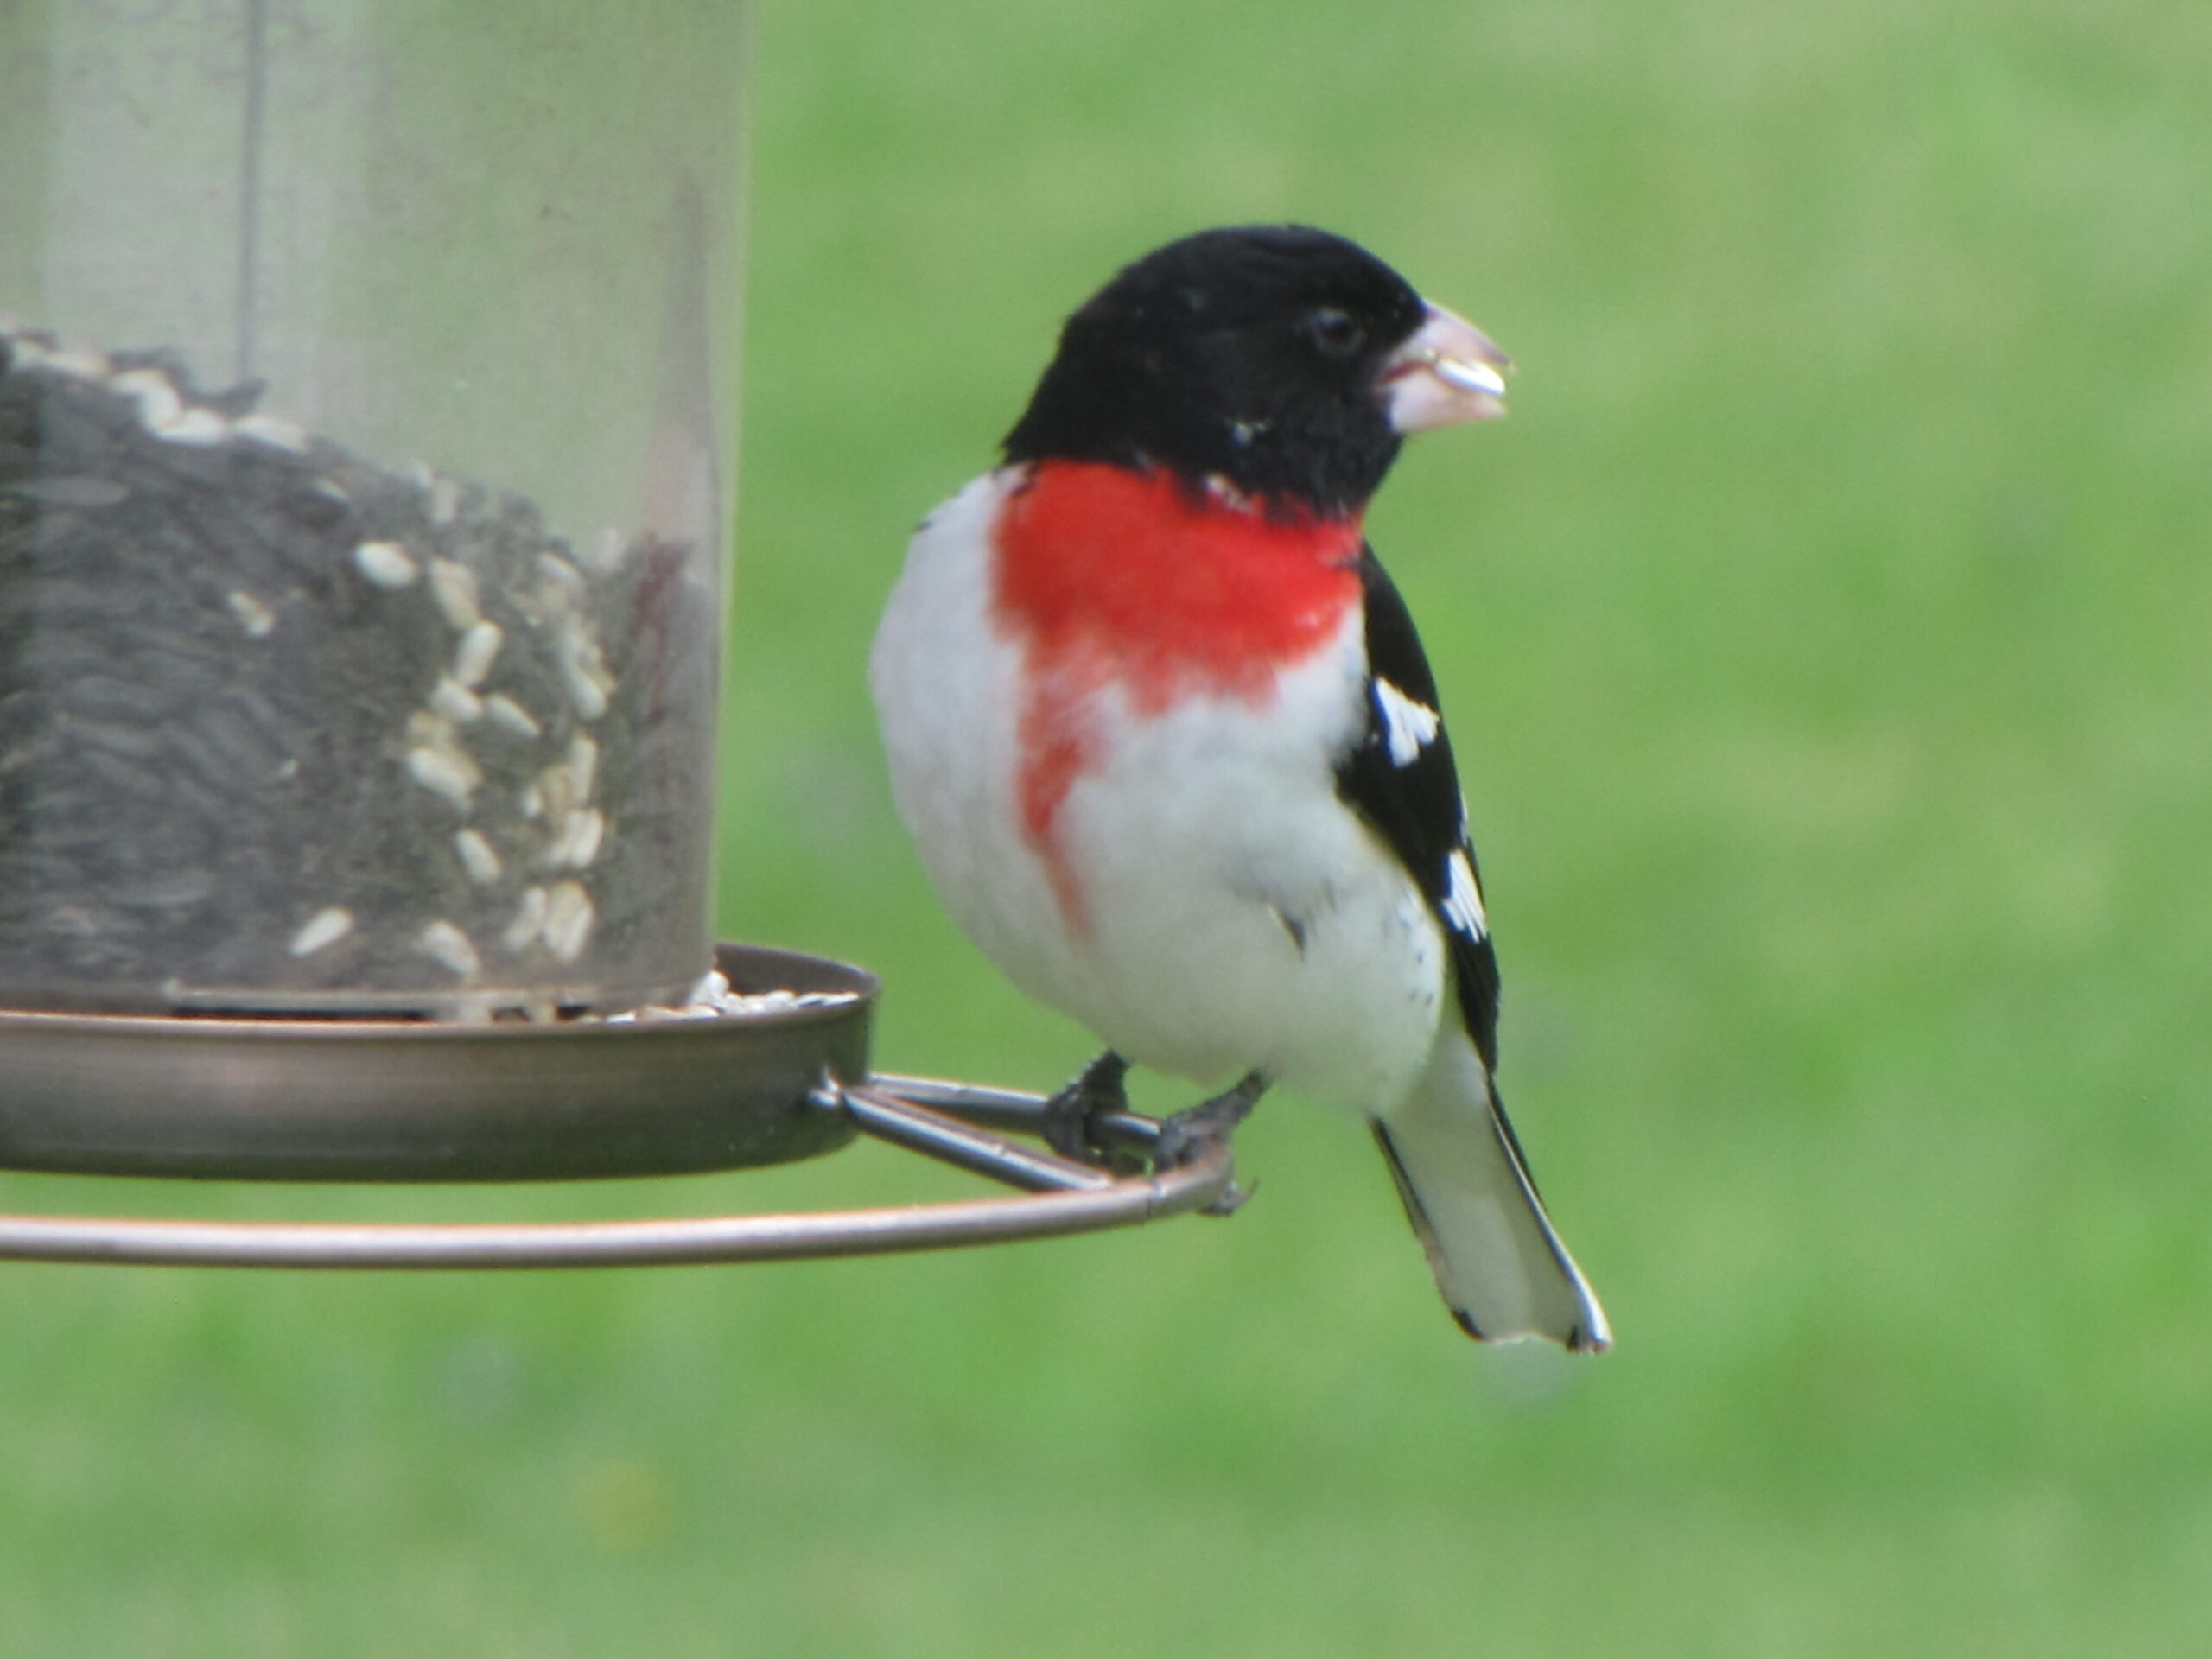 Rose Breasted Grosbeak takes a seed from the feeder